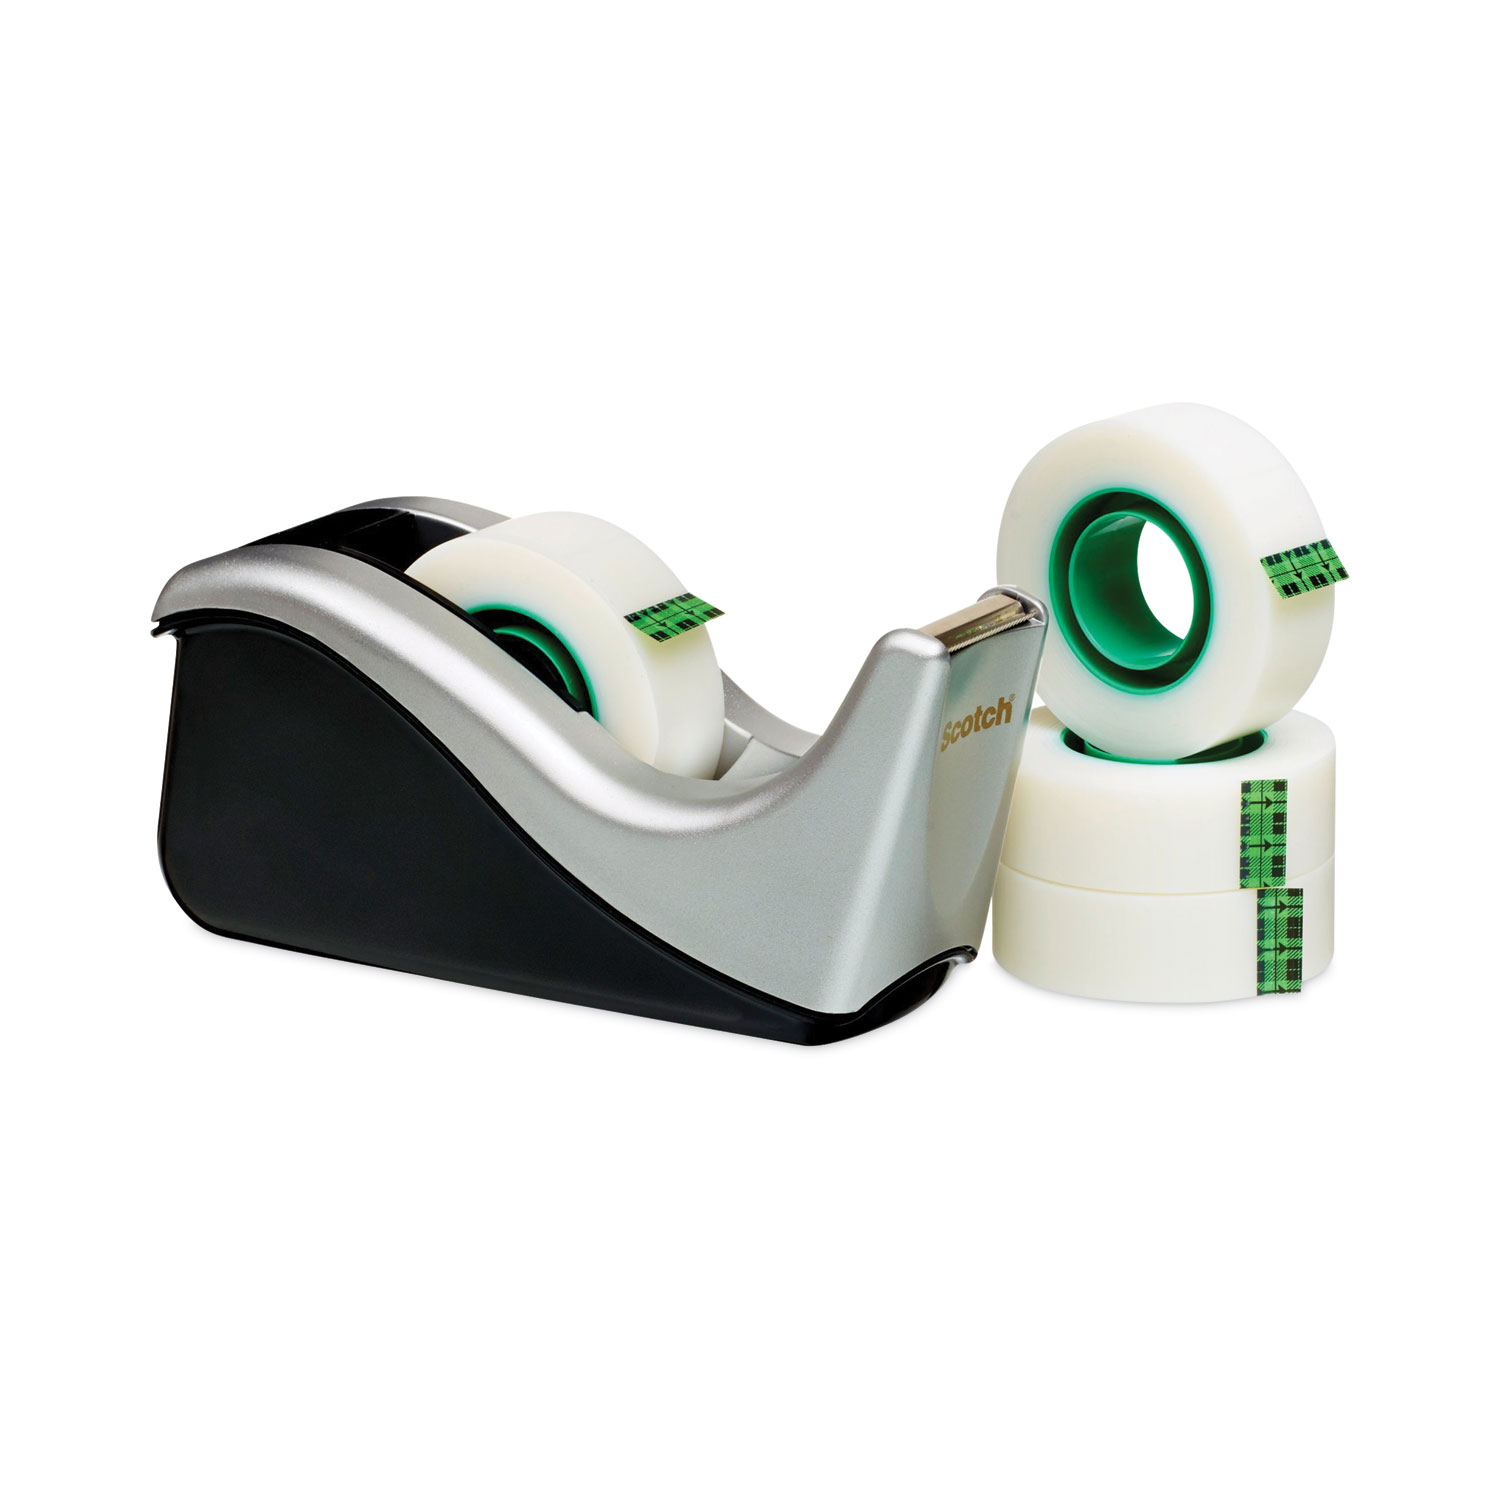 Always in Stock - Cole-Parmer Multi-Roll Tape Dispenser, 9-1/2 L; 1/Pk  from Cole-Parmer